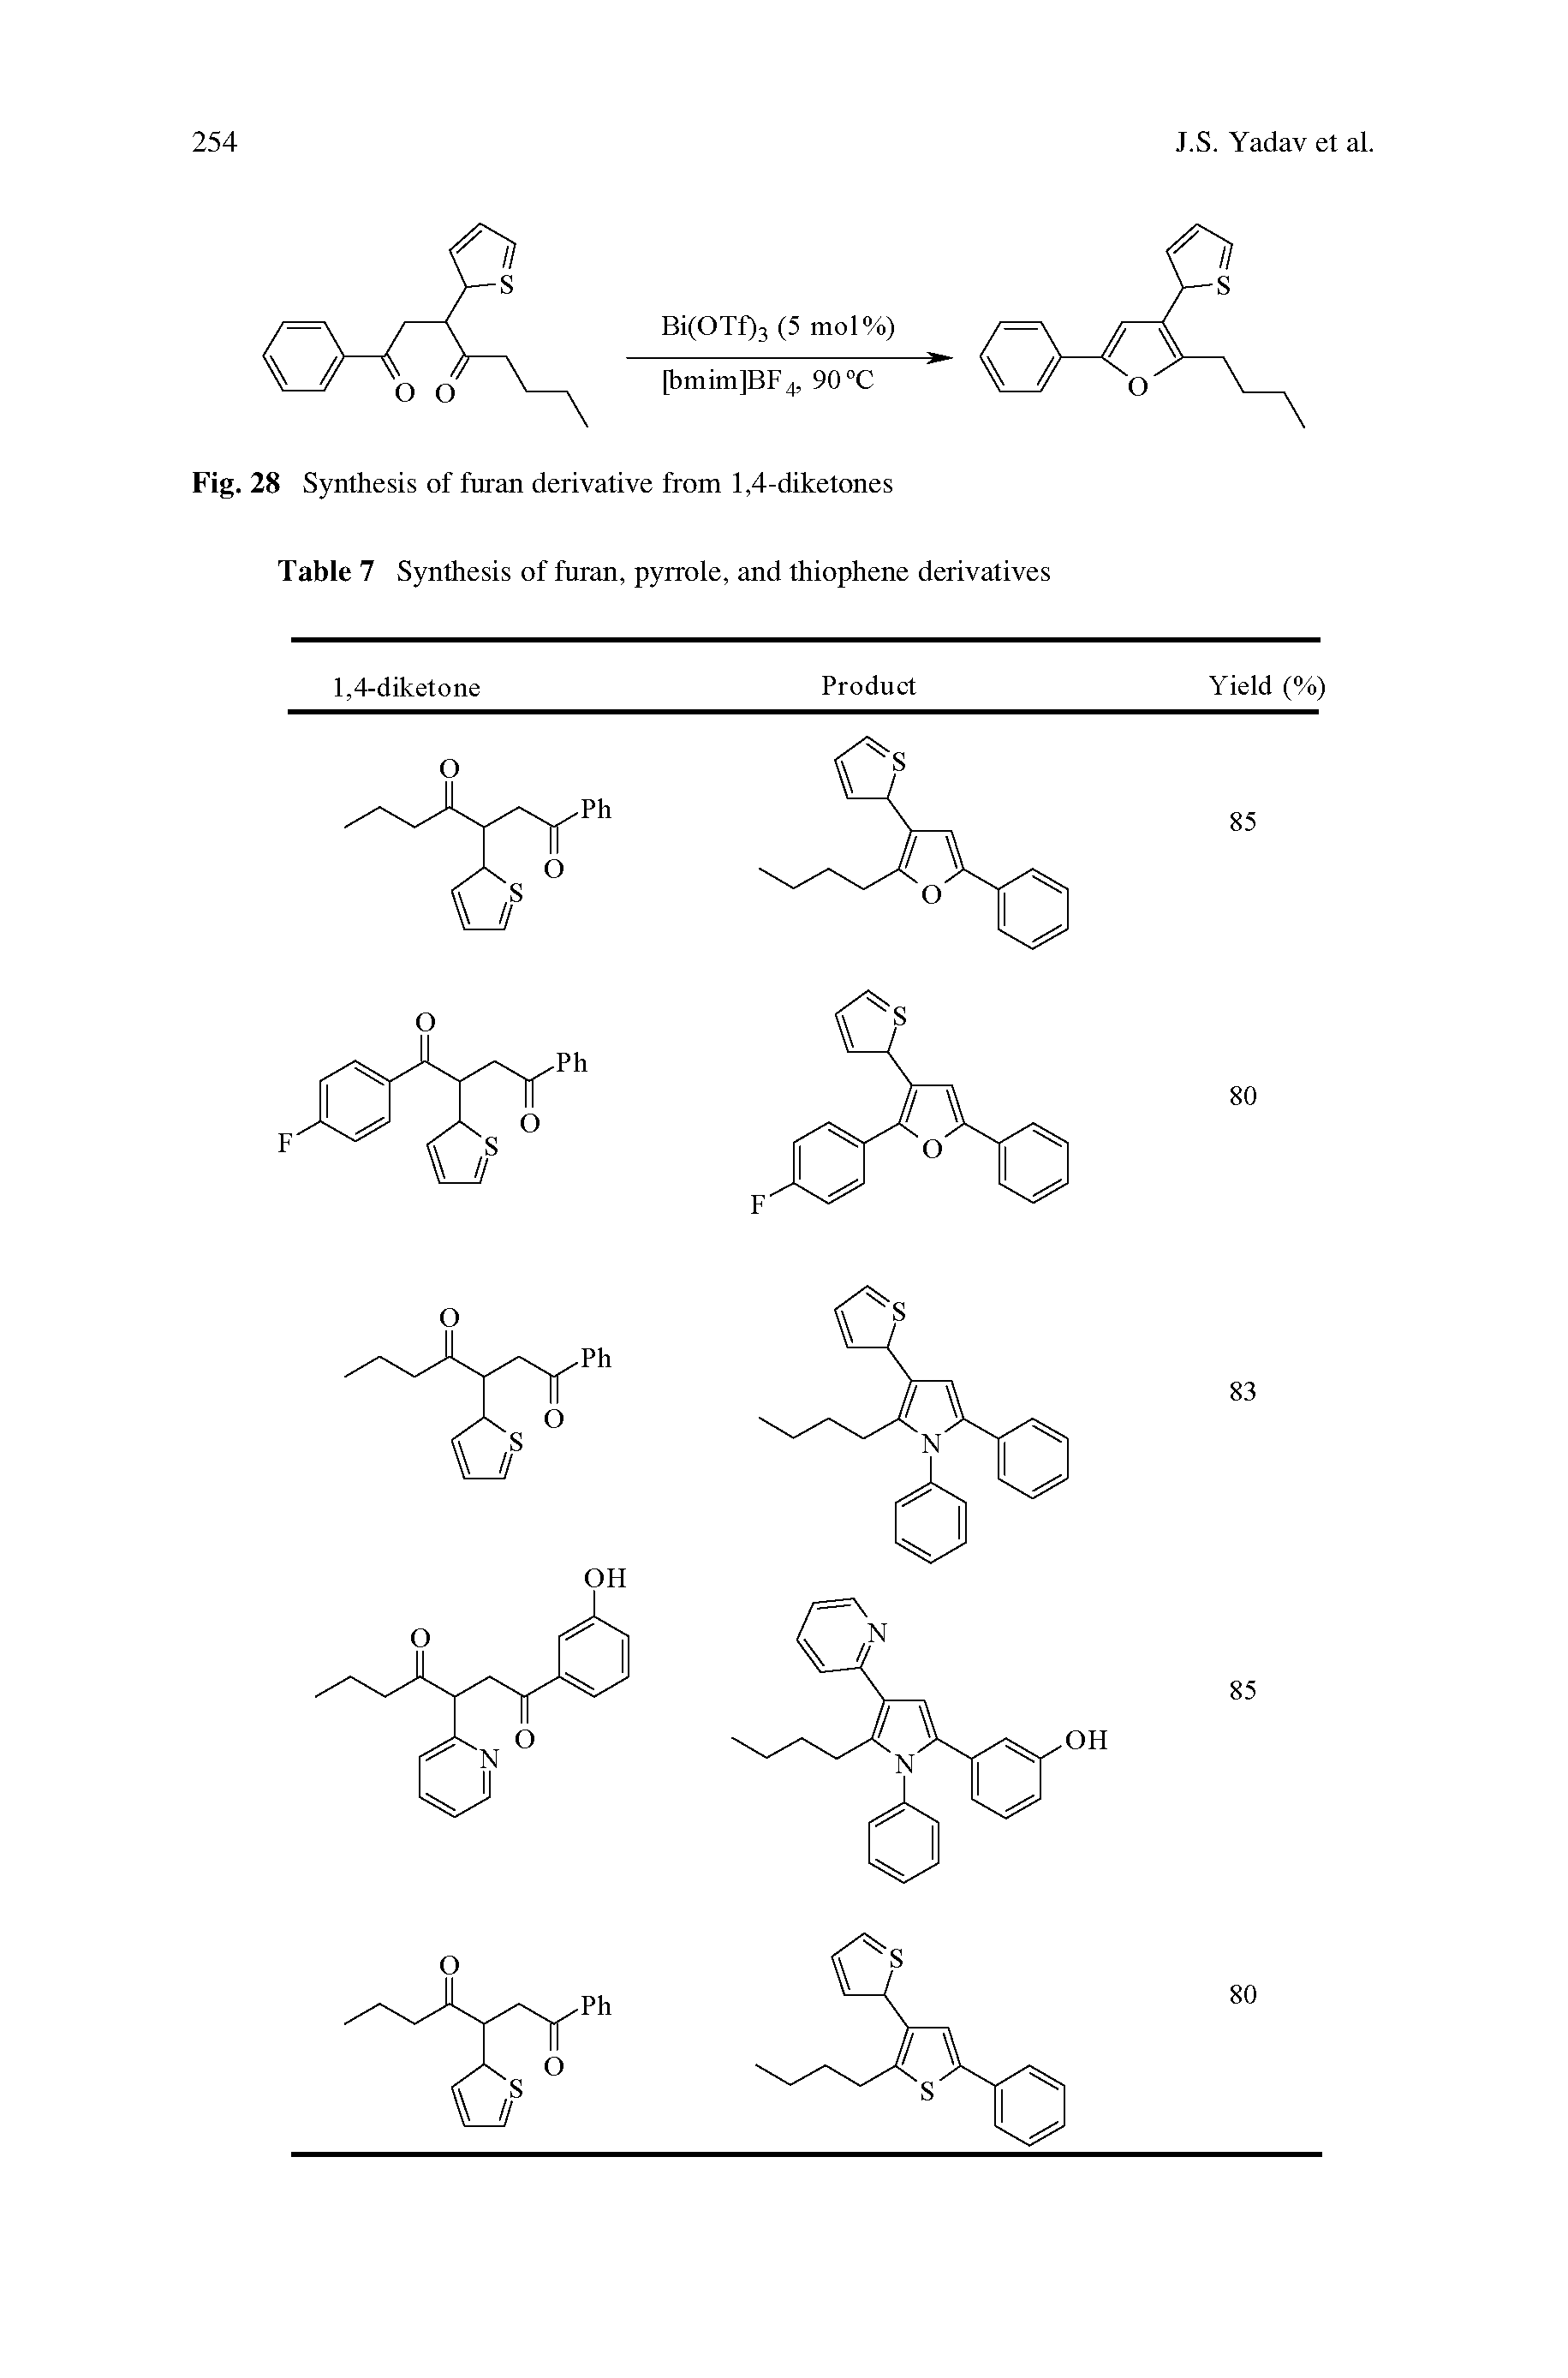 Table 7 Synthesis of furan, pyrrole, and thiophene derivatives...